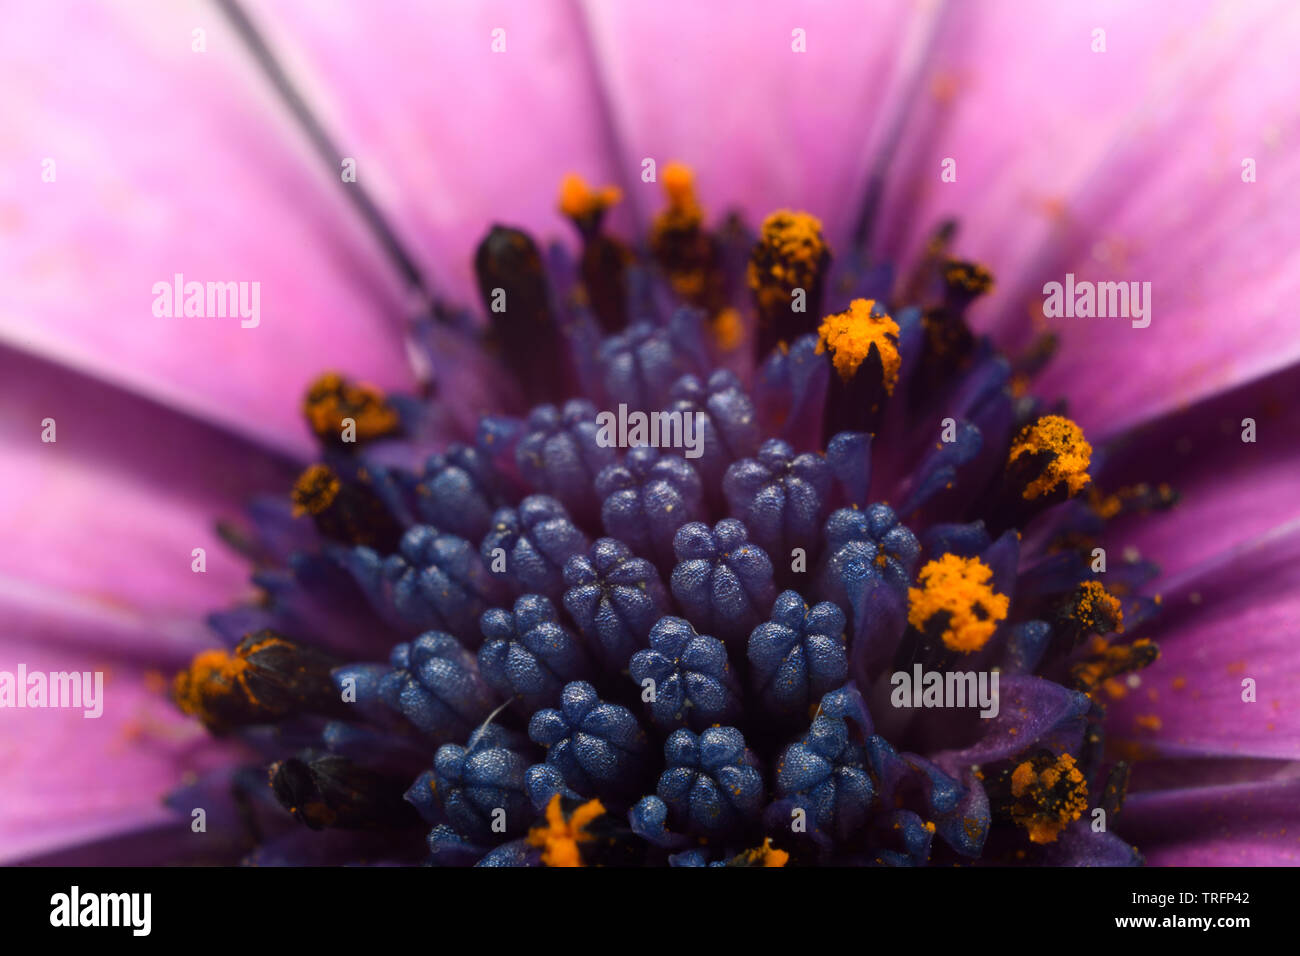 Extreme close up of the blue disk florets opening to release yellow pollen in a pink African Daisy Stock Photo